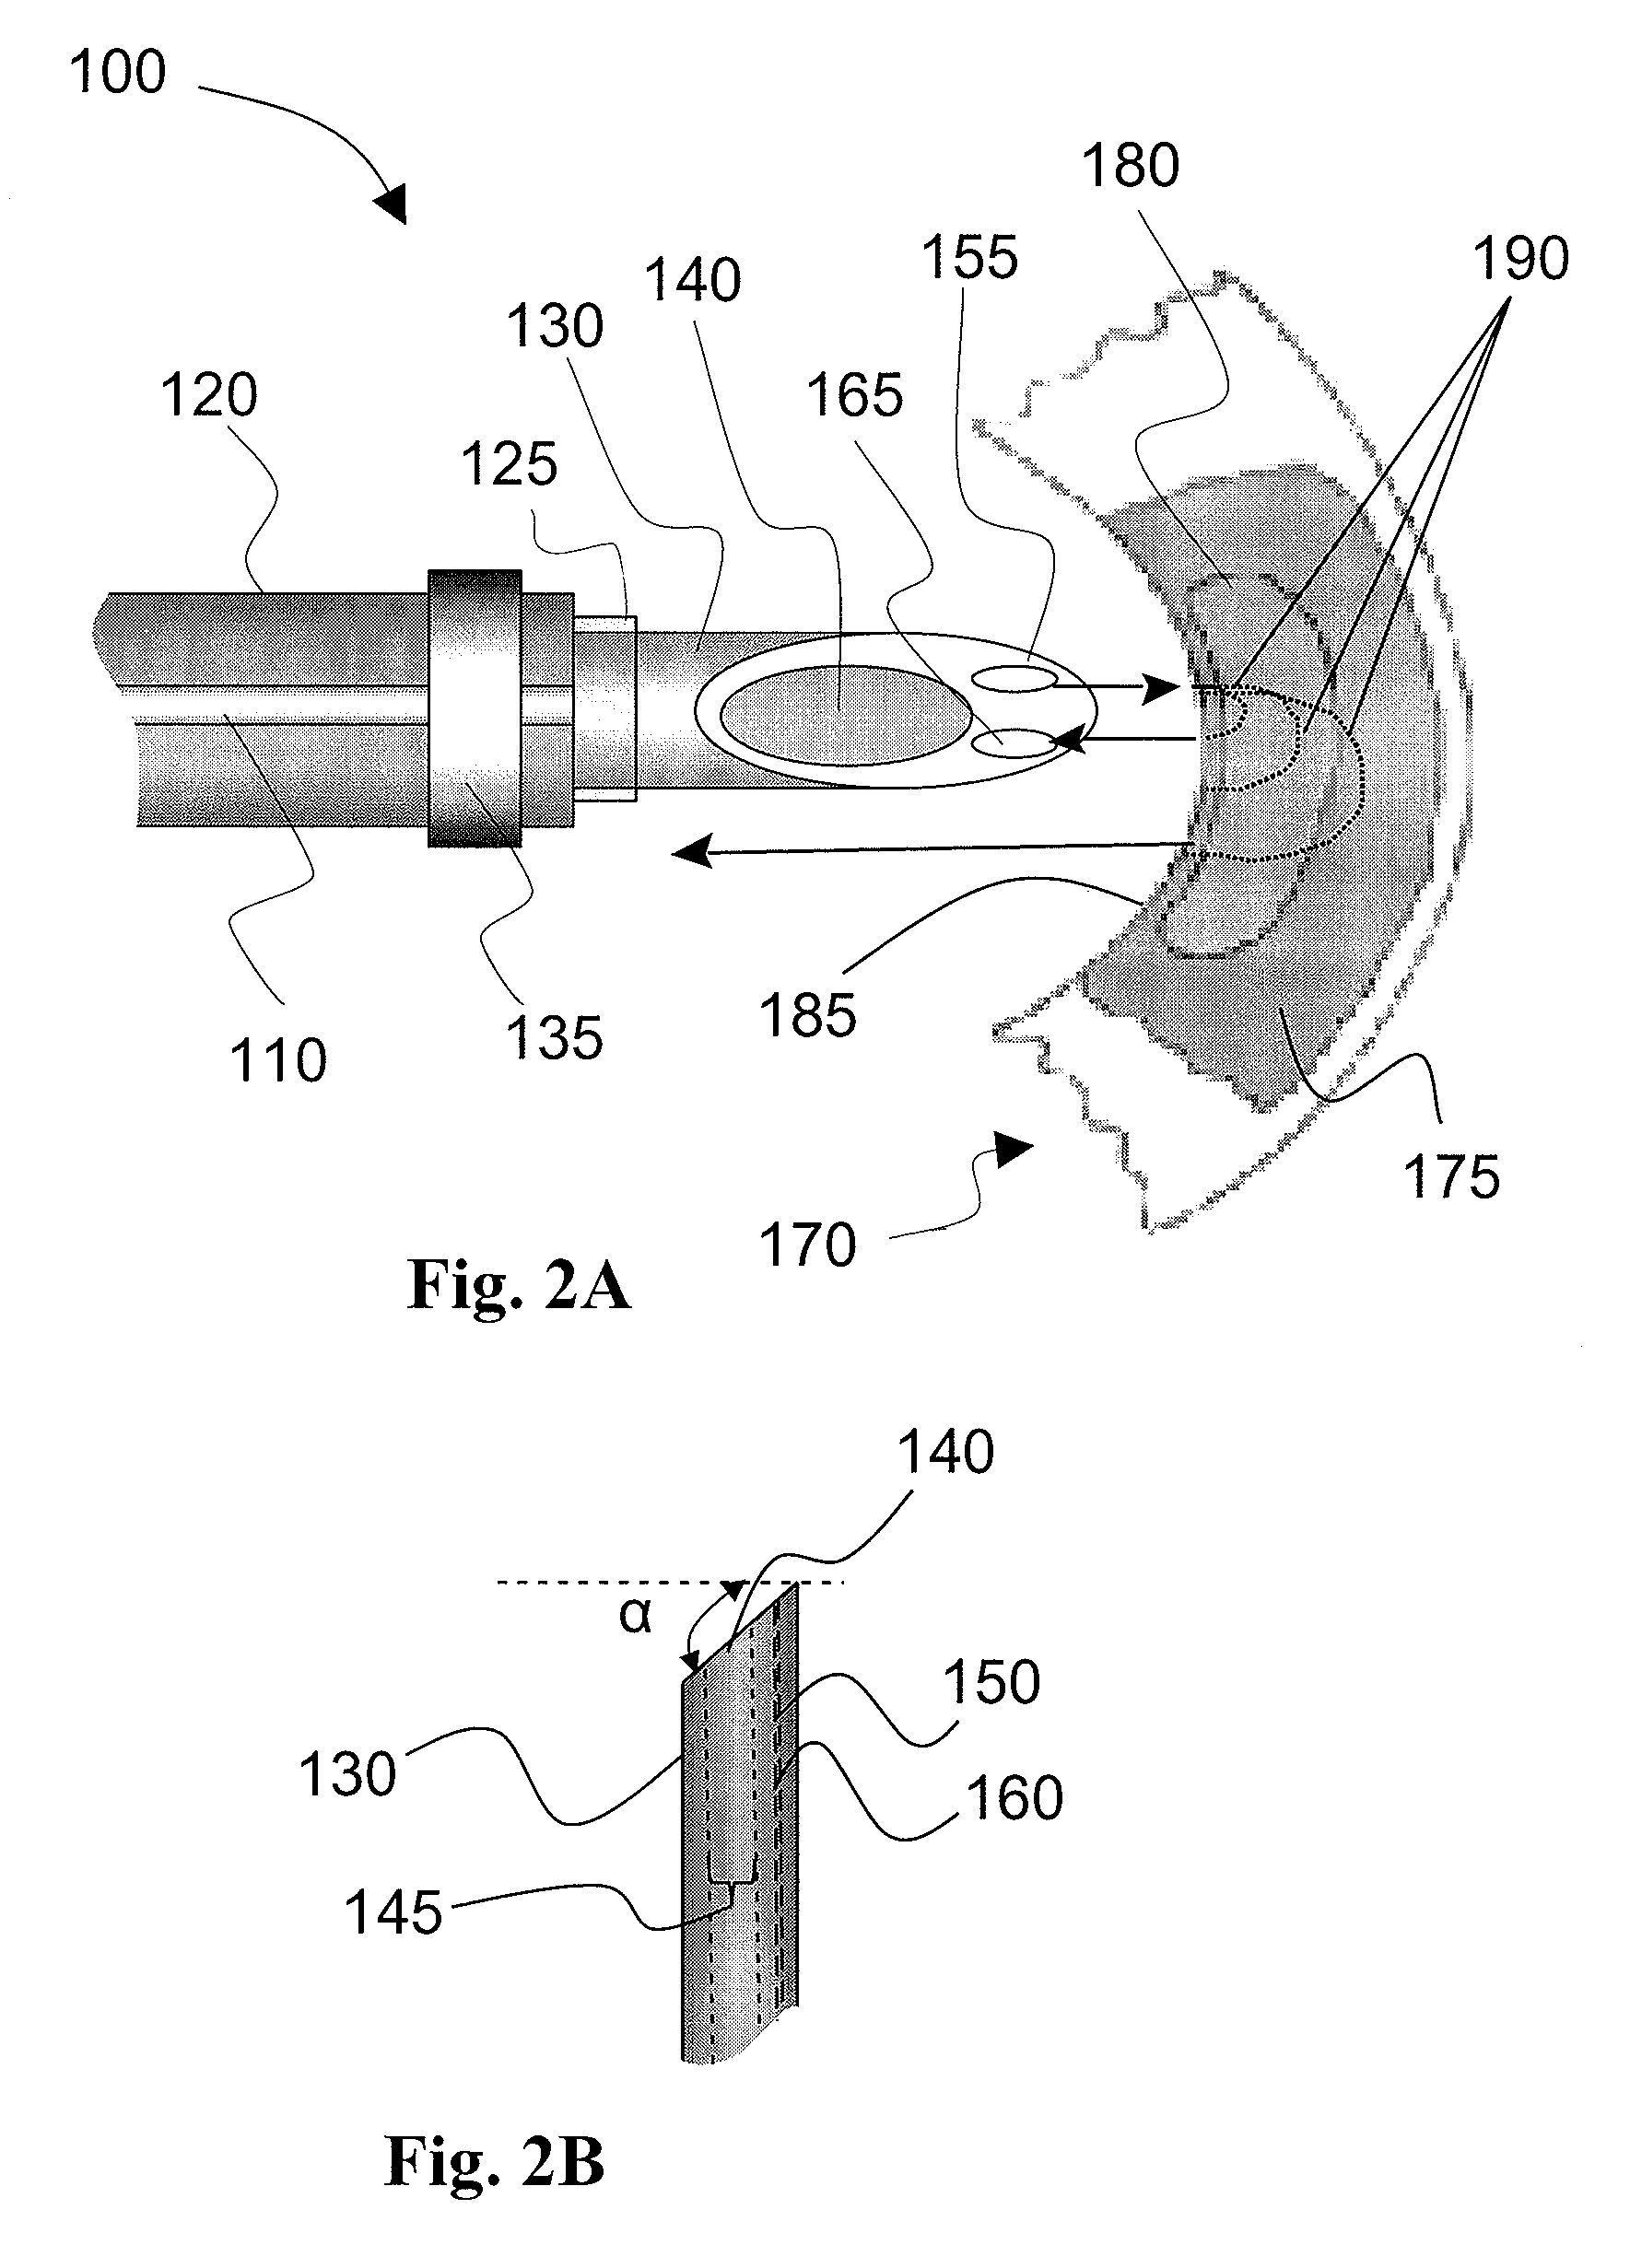 Method and apparatus for identifying and treating myocardial infarction